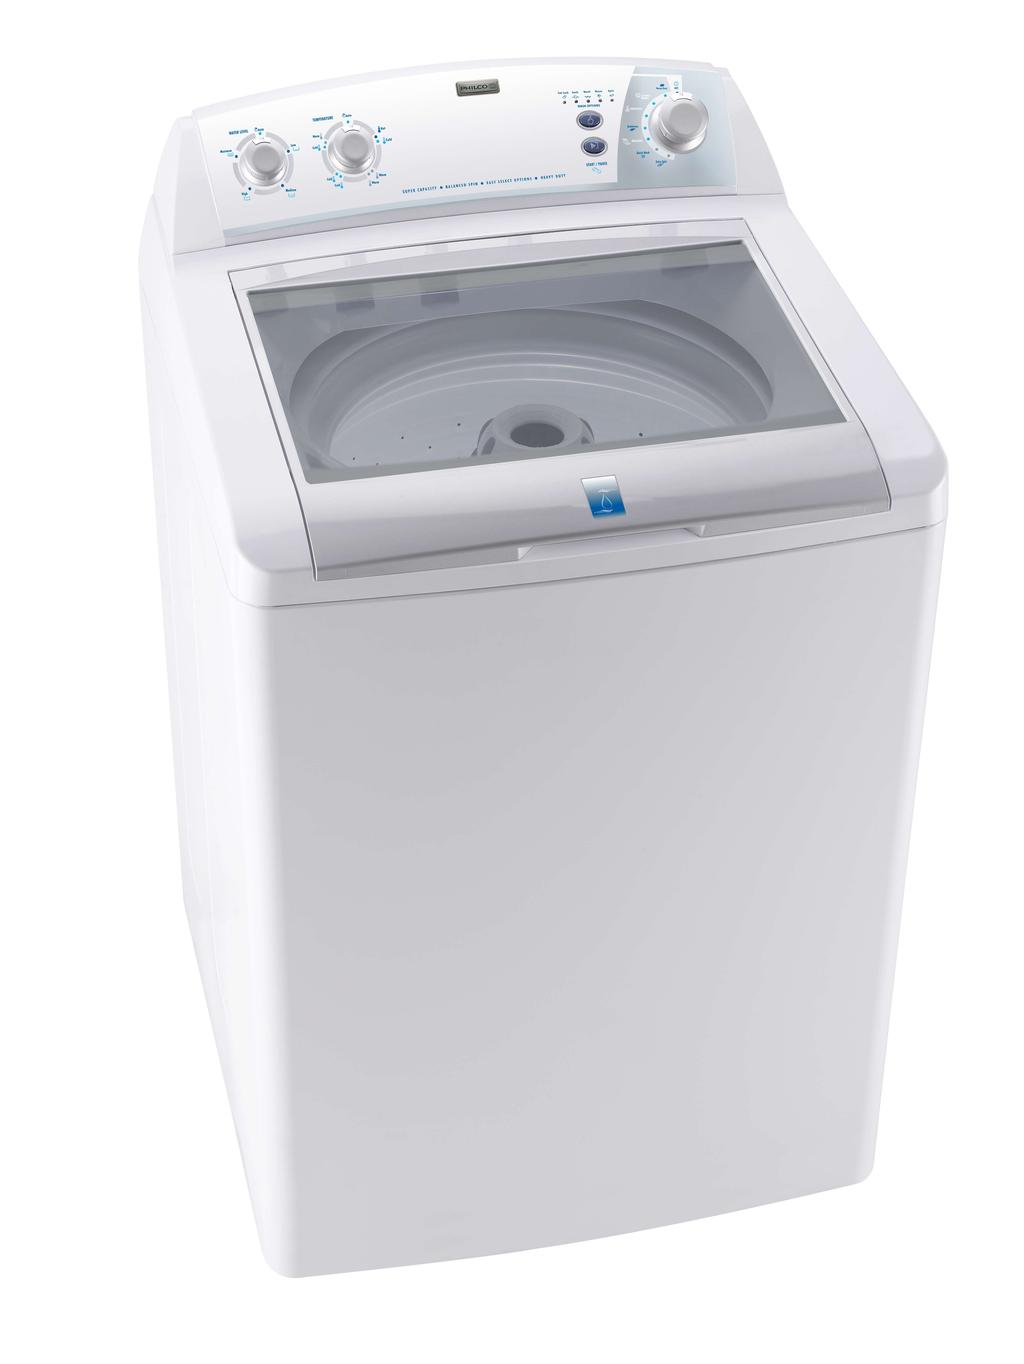 Washer The new Philco extra large capacity top load washers can conveniently wash 12.